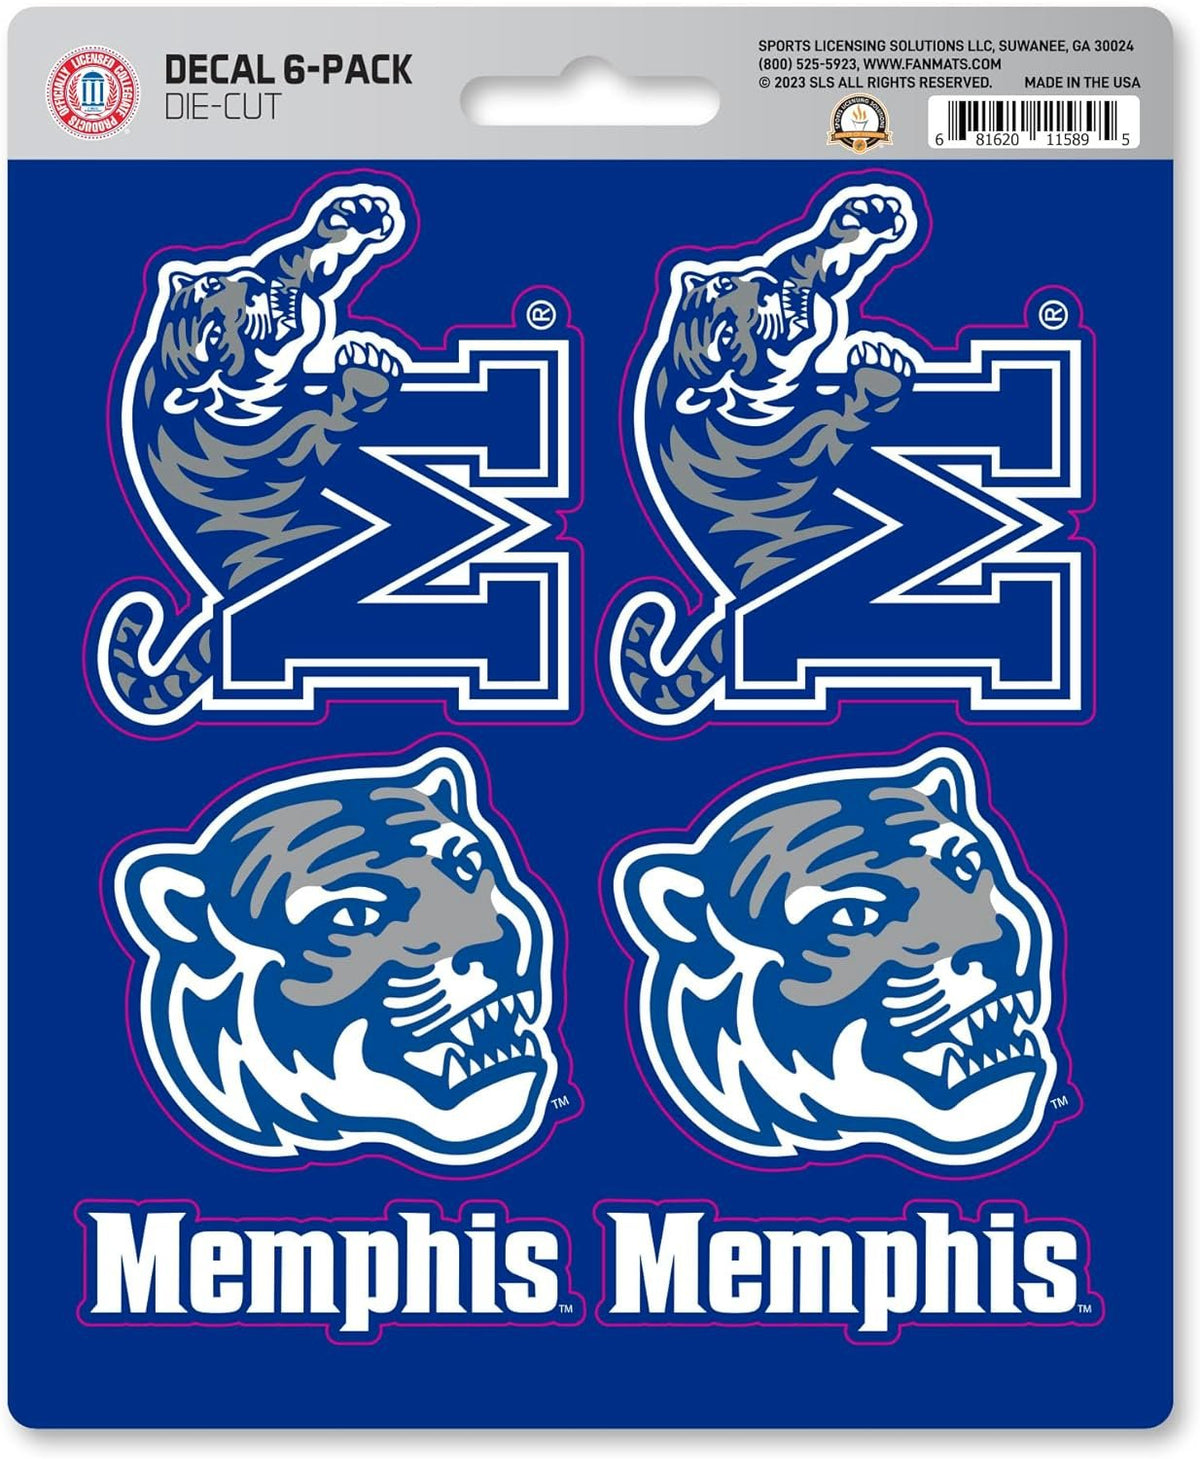  University of Memphis Tigers M with TIGER Logo 4 Vinyl Decal  UM Tigers Car Truck Window Sticker : Sports & Outdoors